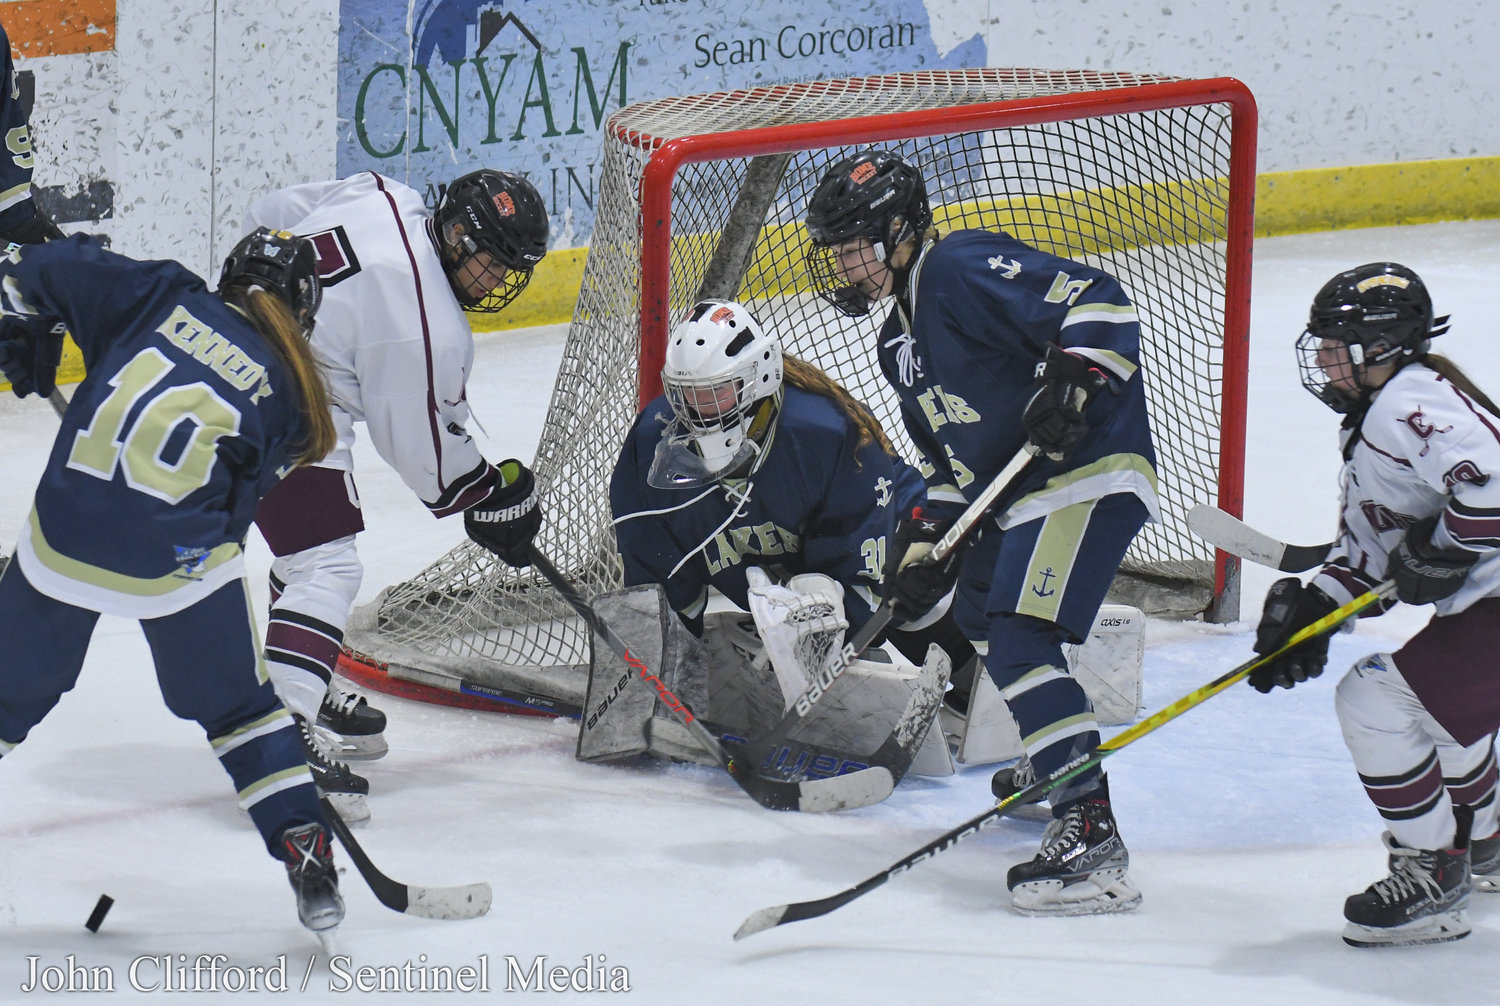 The Clinton Warriors in action against the Skaneateles Lakers in the Section III girls ice hockey championship Wednesday night in Nedrow. Clinton beat Skaneateles 1-0 in overtime.